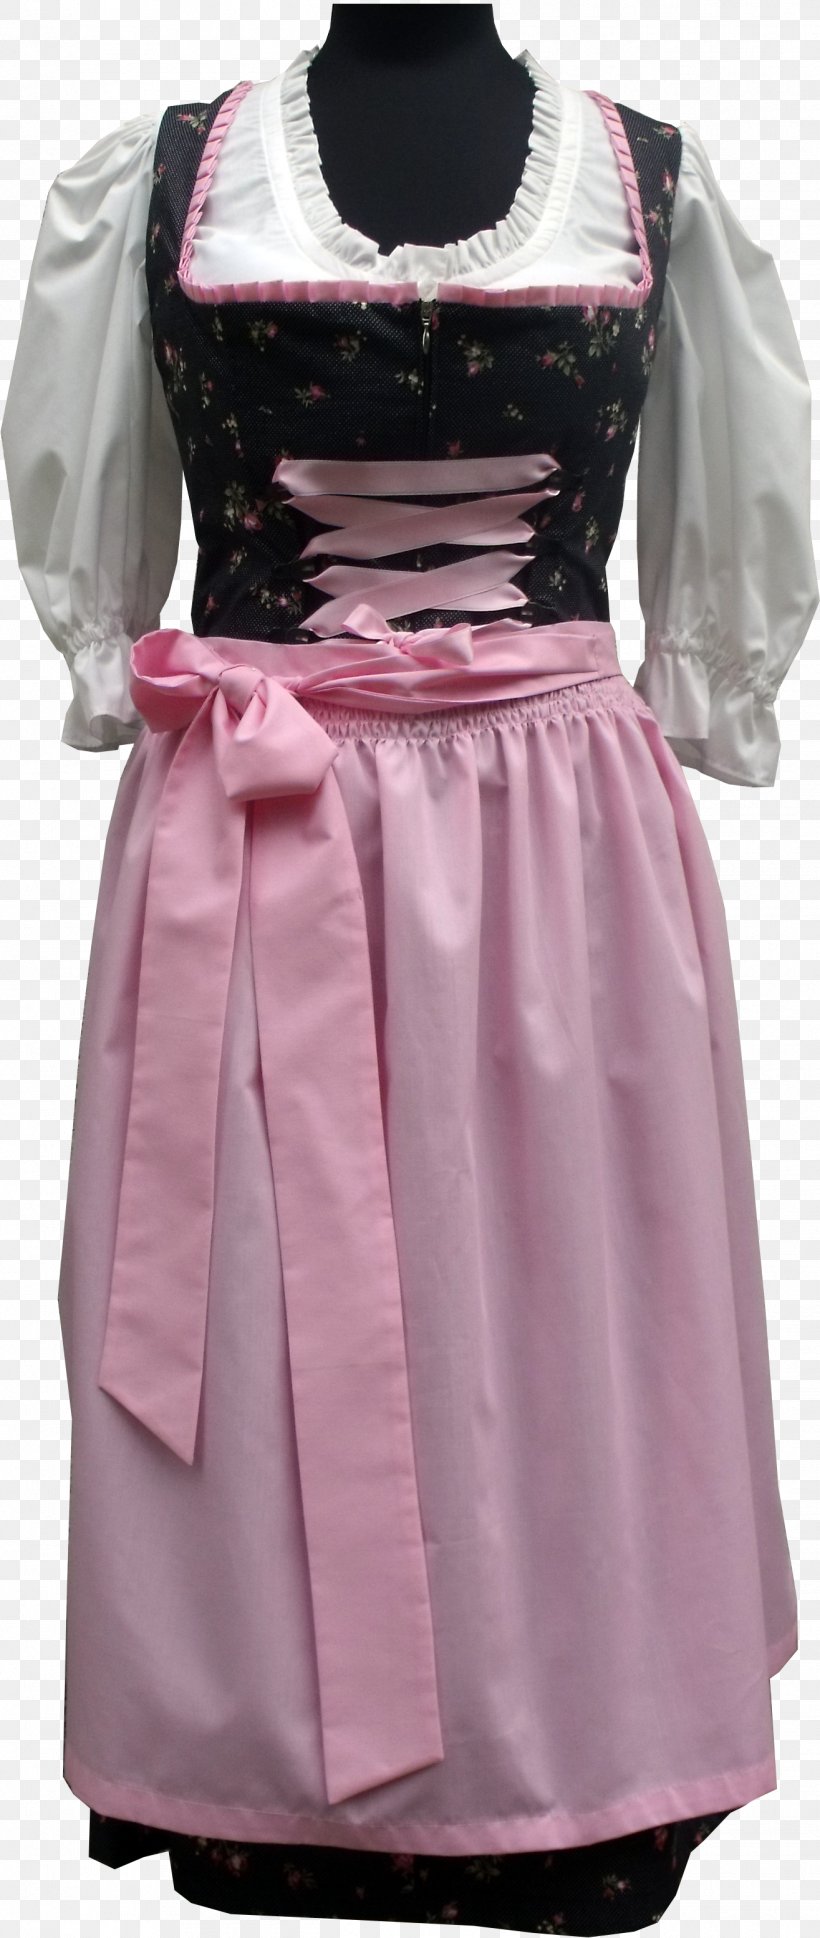 Cocktail Dress Clothing Folk Costume, PNG, 1315x3109px, Dress, Ancestor, Clothing, Cocktail, Cocktail Dress Download Free